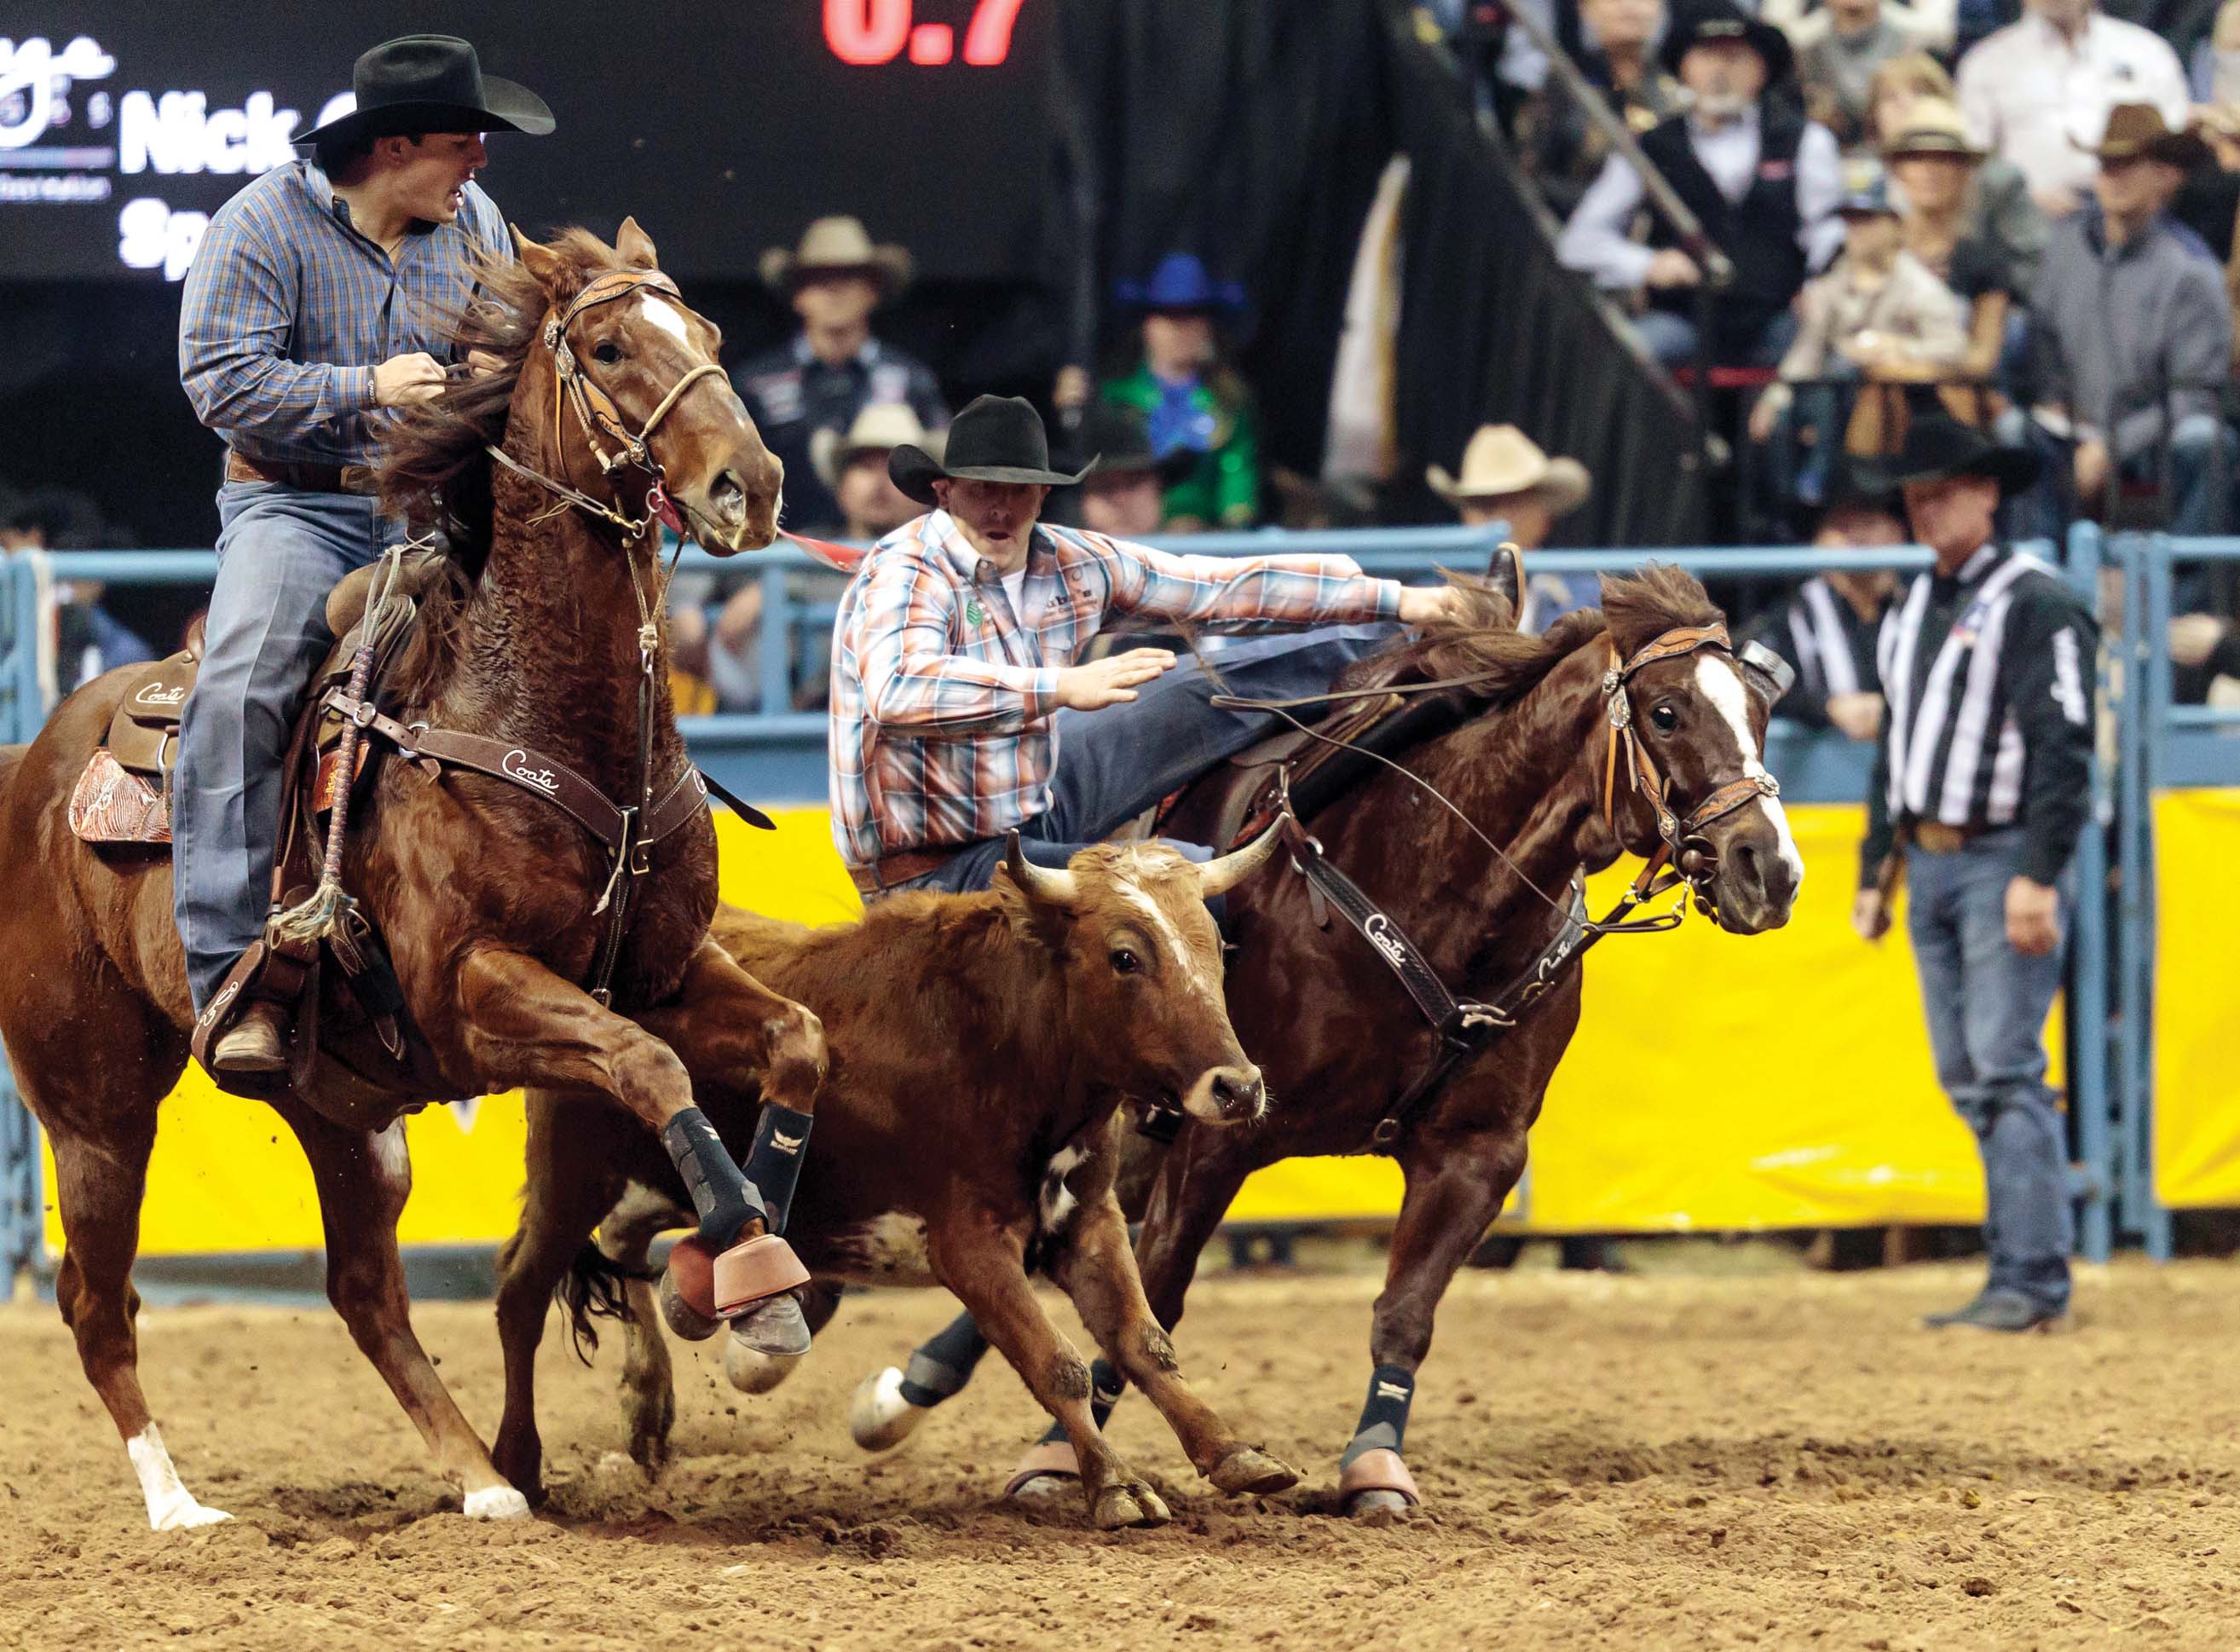 RGR Ryon, aka Maverick, is the #2 PRCA/AQHA Steer Wrestling Horse of the Year. Maverick is by Ralph Ryon, who is out of Fax It by Dash For Cash.